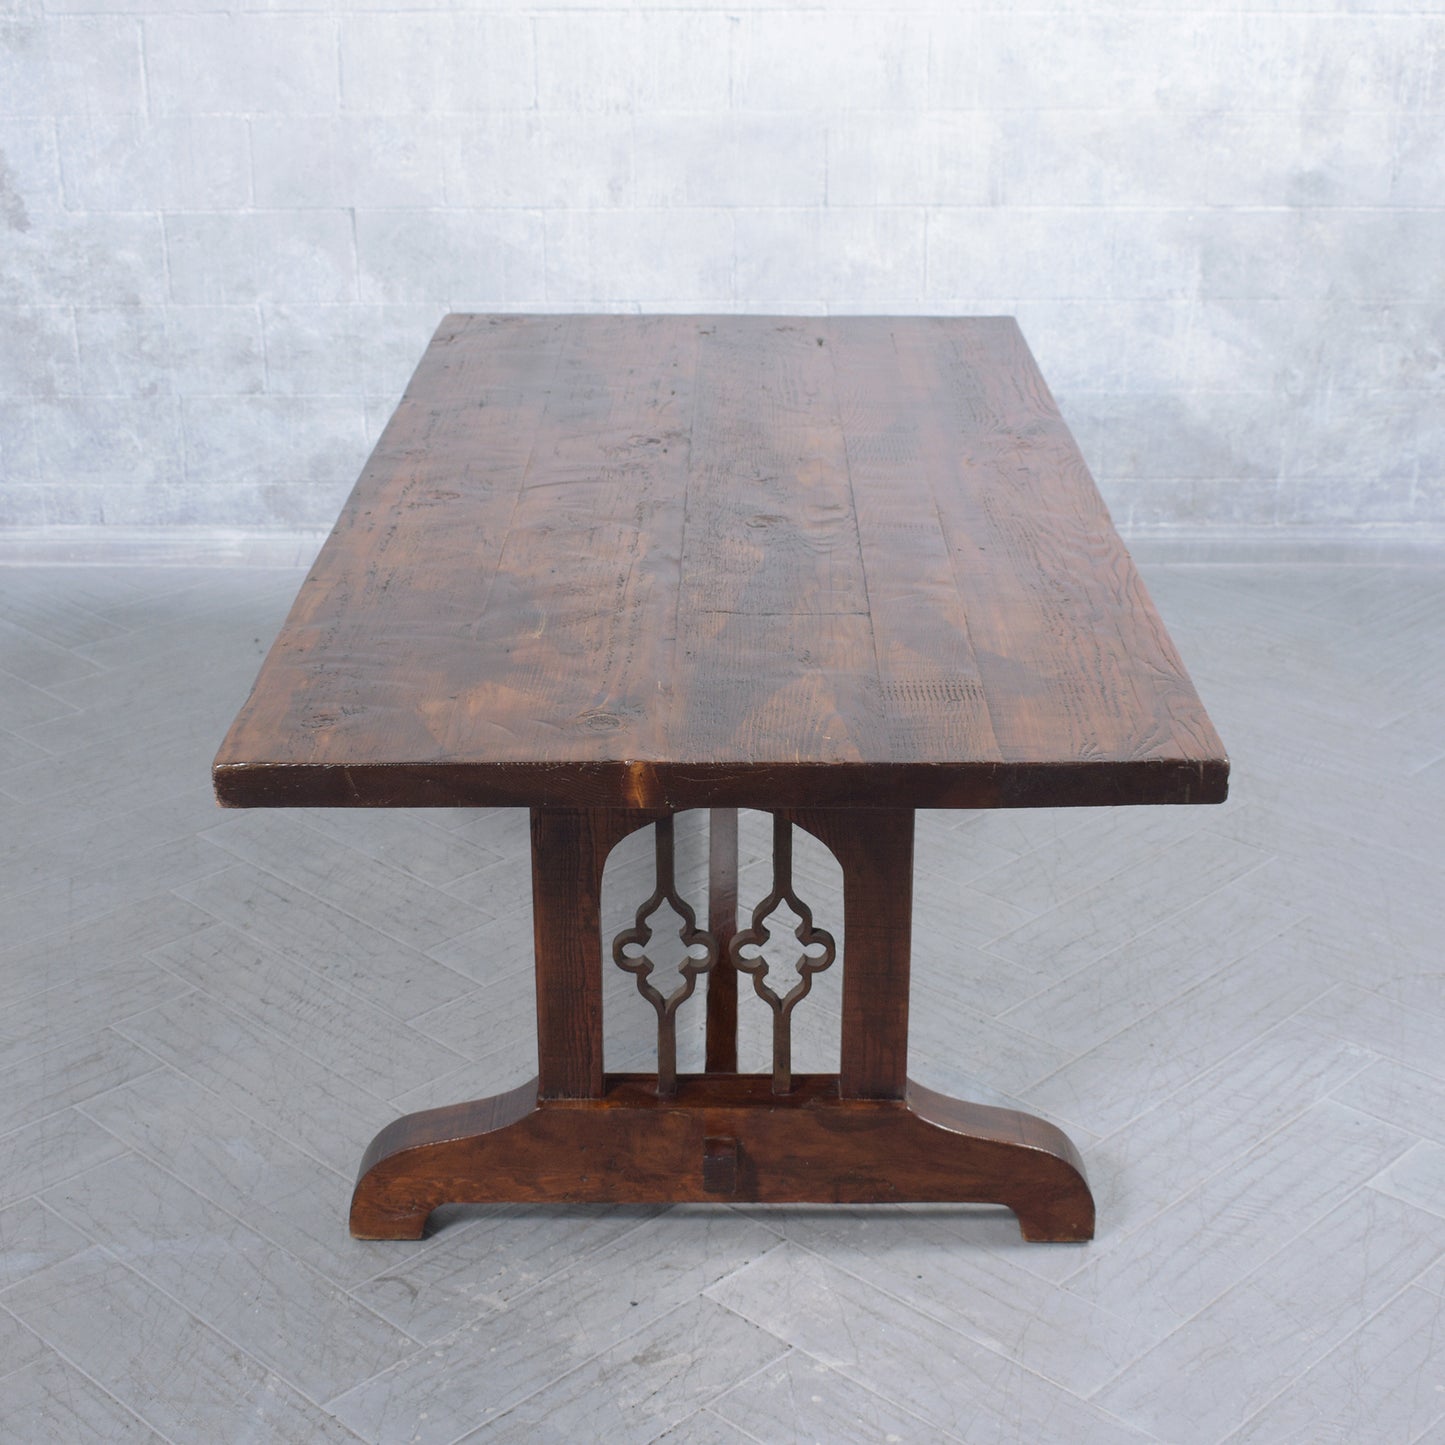 Vintage Solid Wood Dining Table: Handcrafted Elegance with Modern Design Accents